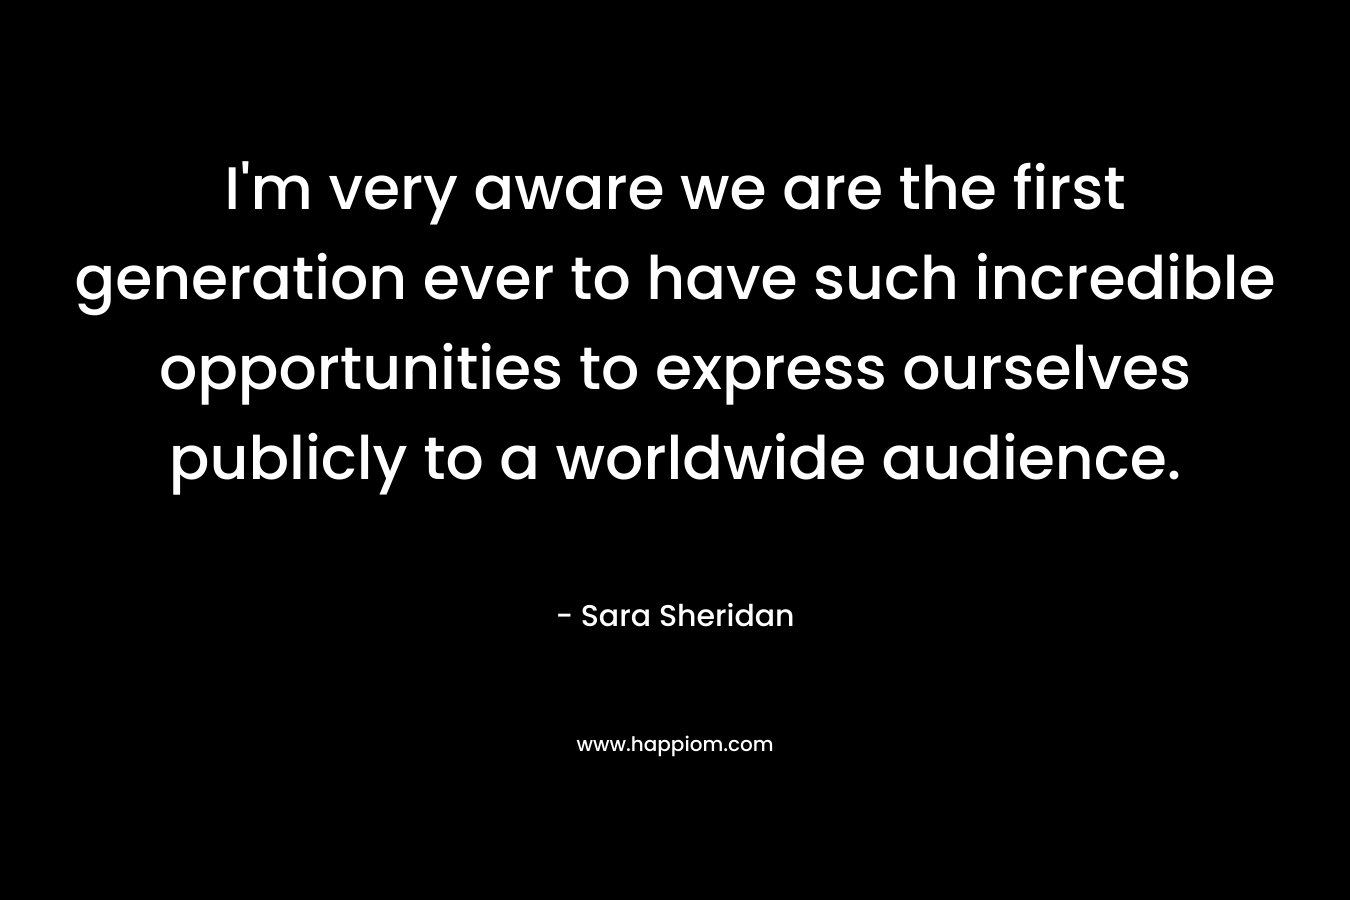 I’m very aware we are the first generation ever to have such incredible opportunities to express ourselves publicly to a worldwide audience. – Sara Sheridan